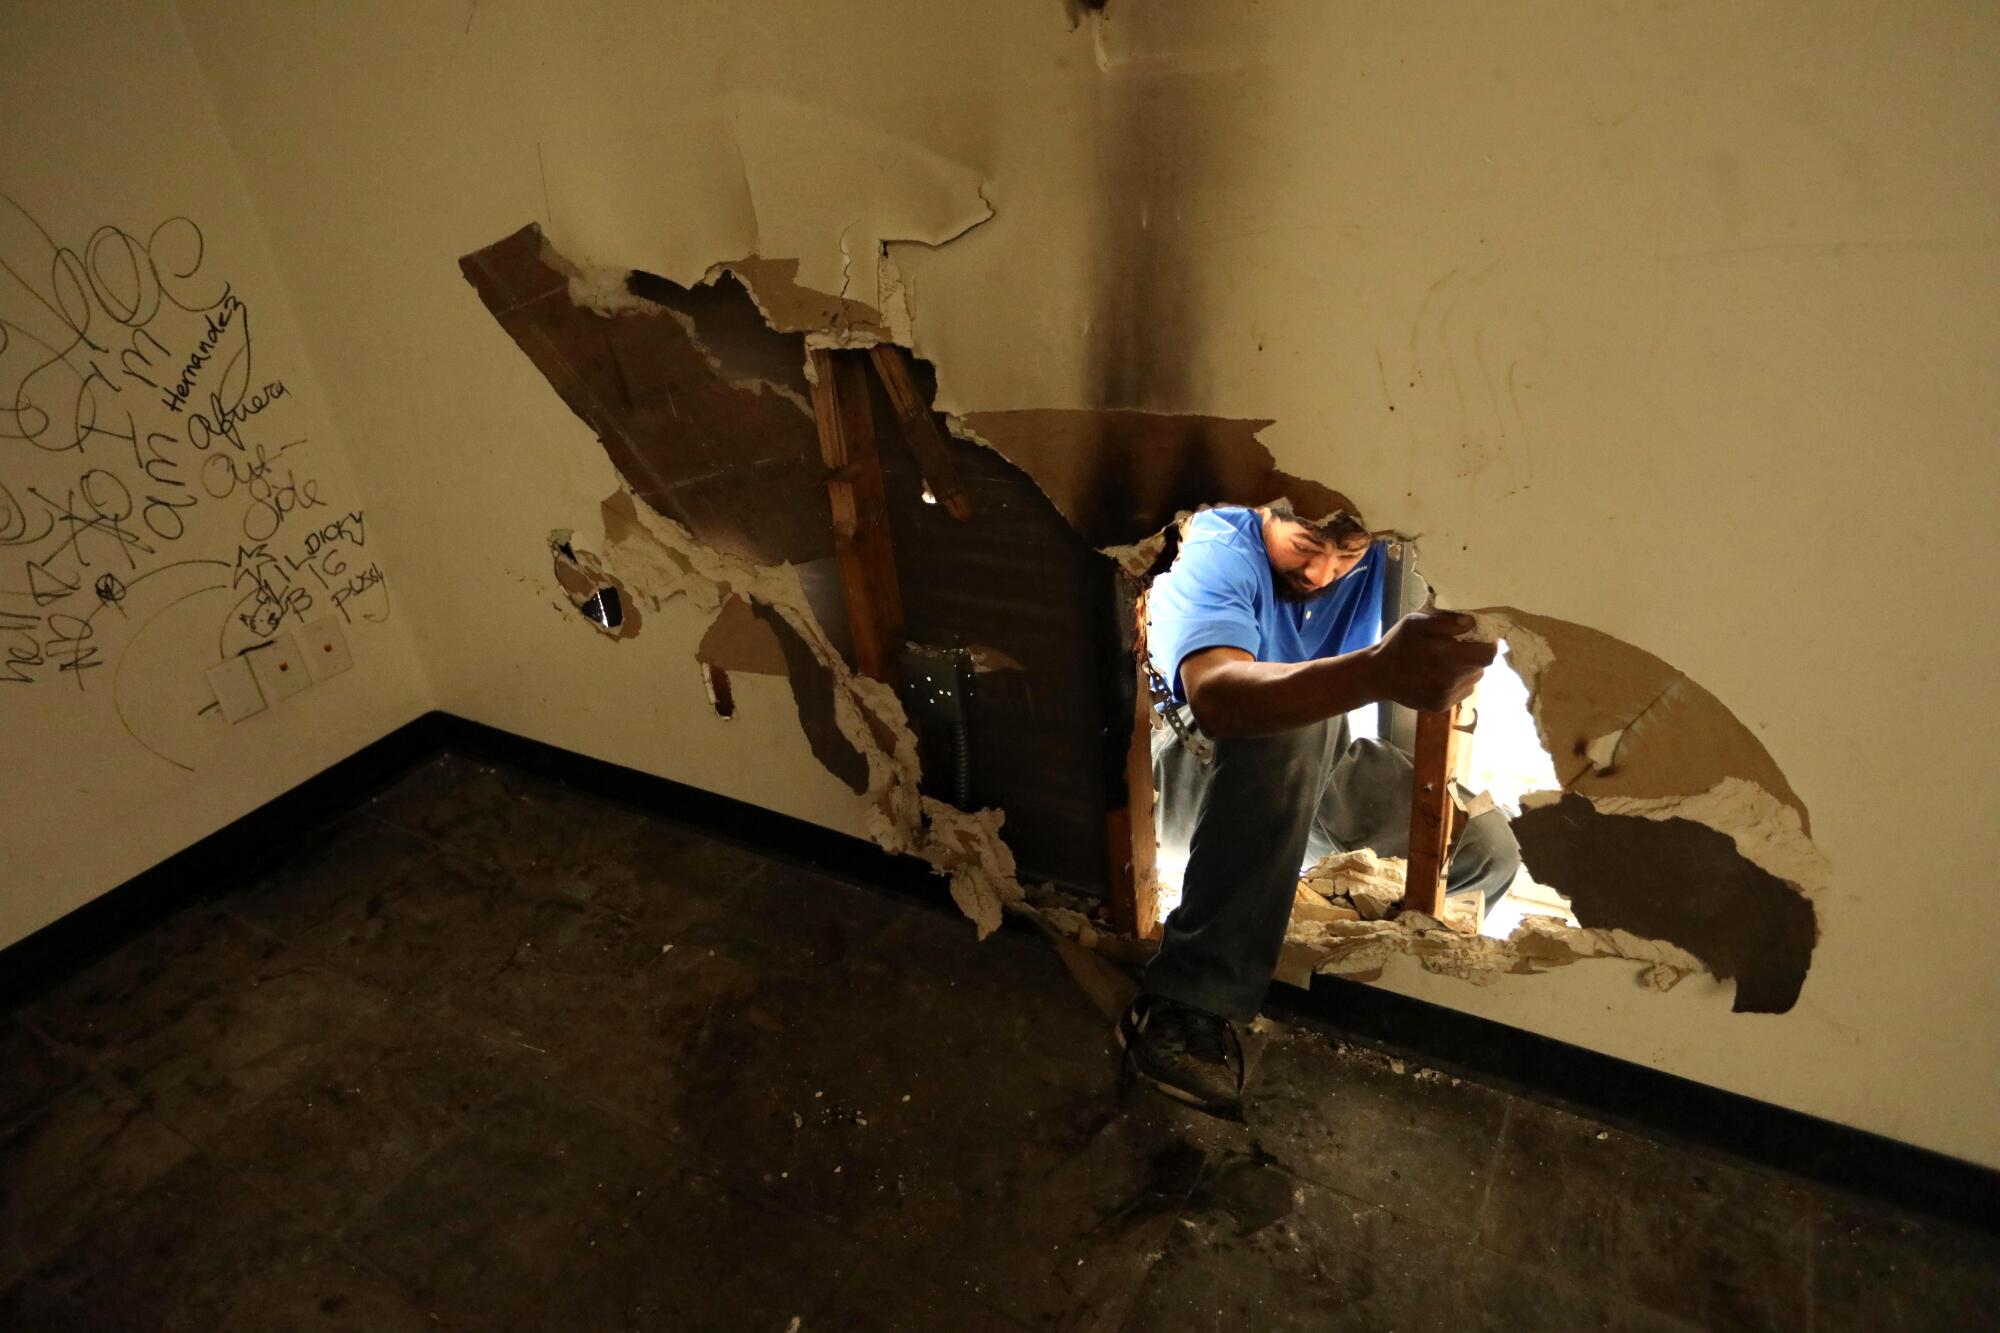 A man enters a building through a hole in the wall